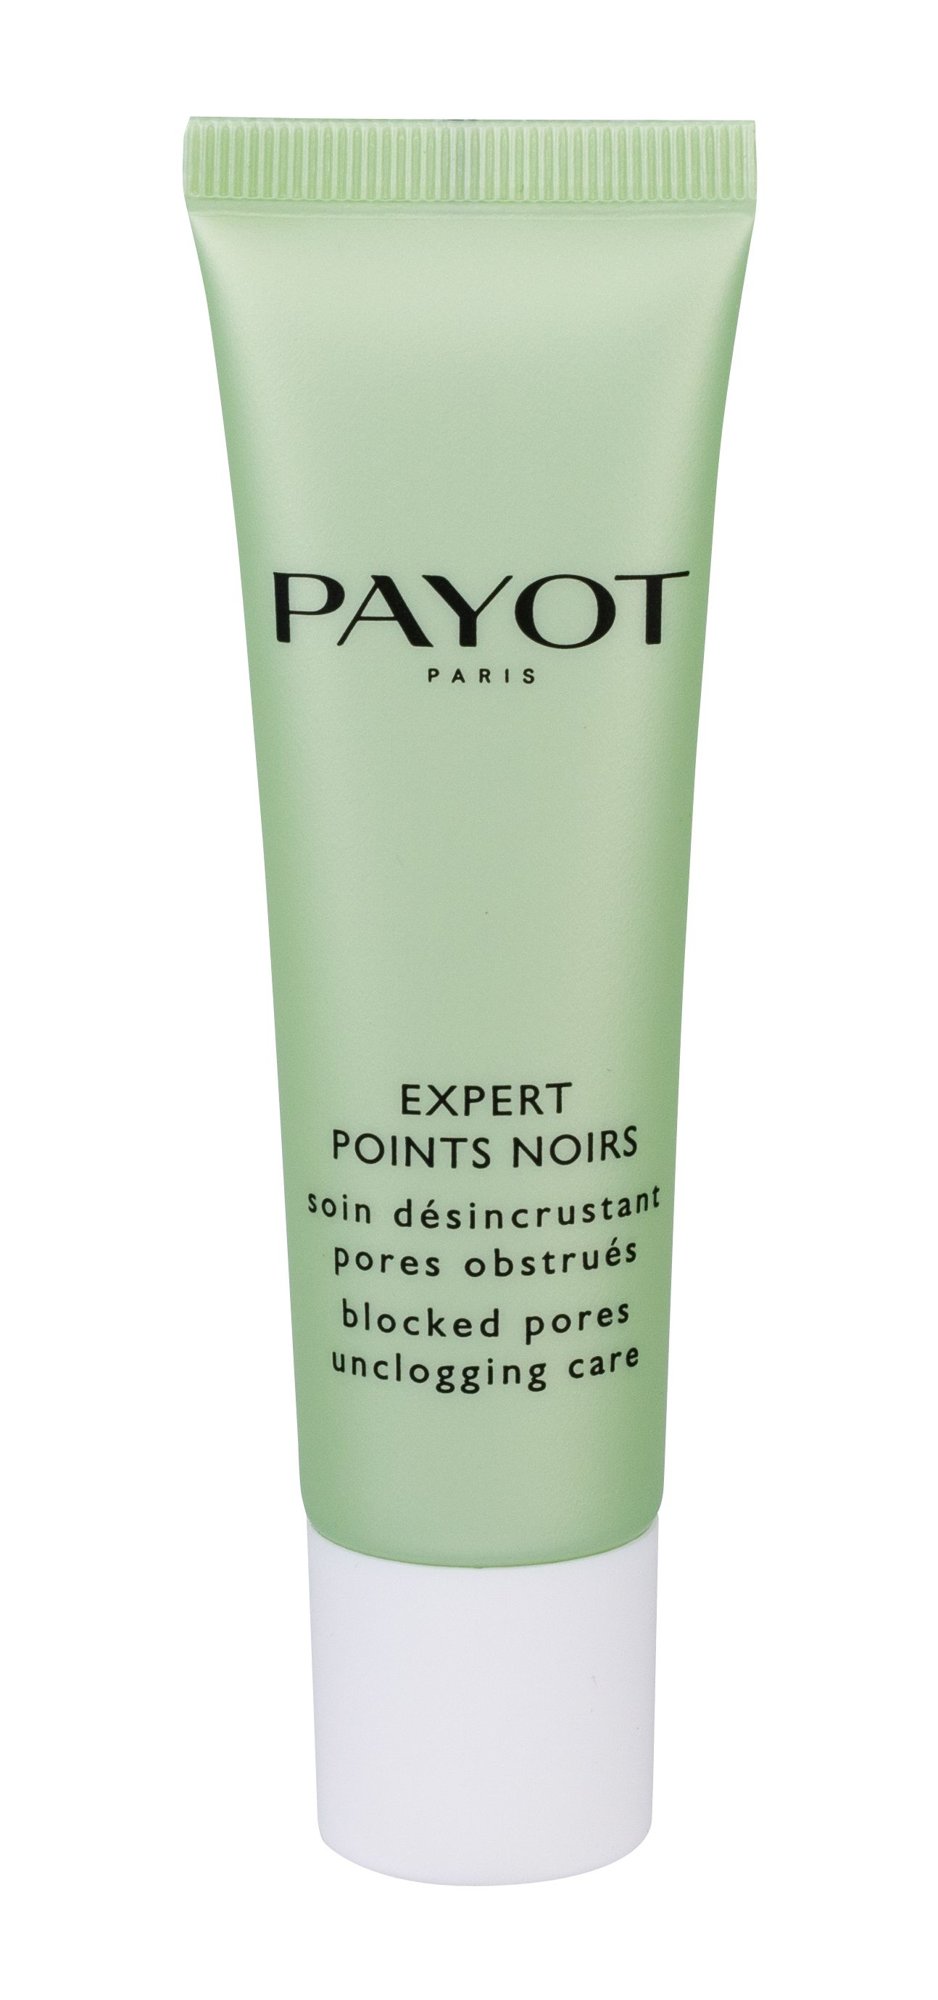 Payot Expert Points Noirs Blocked Pores Unclogging Care veido gelis